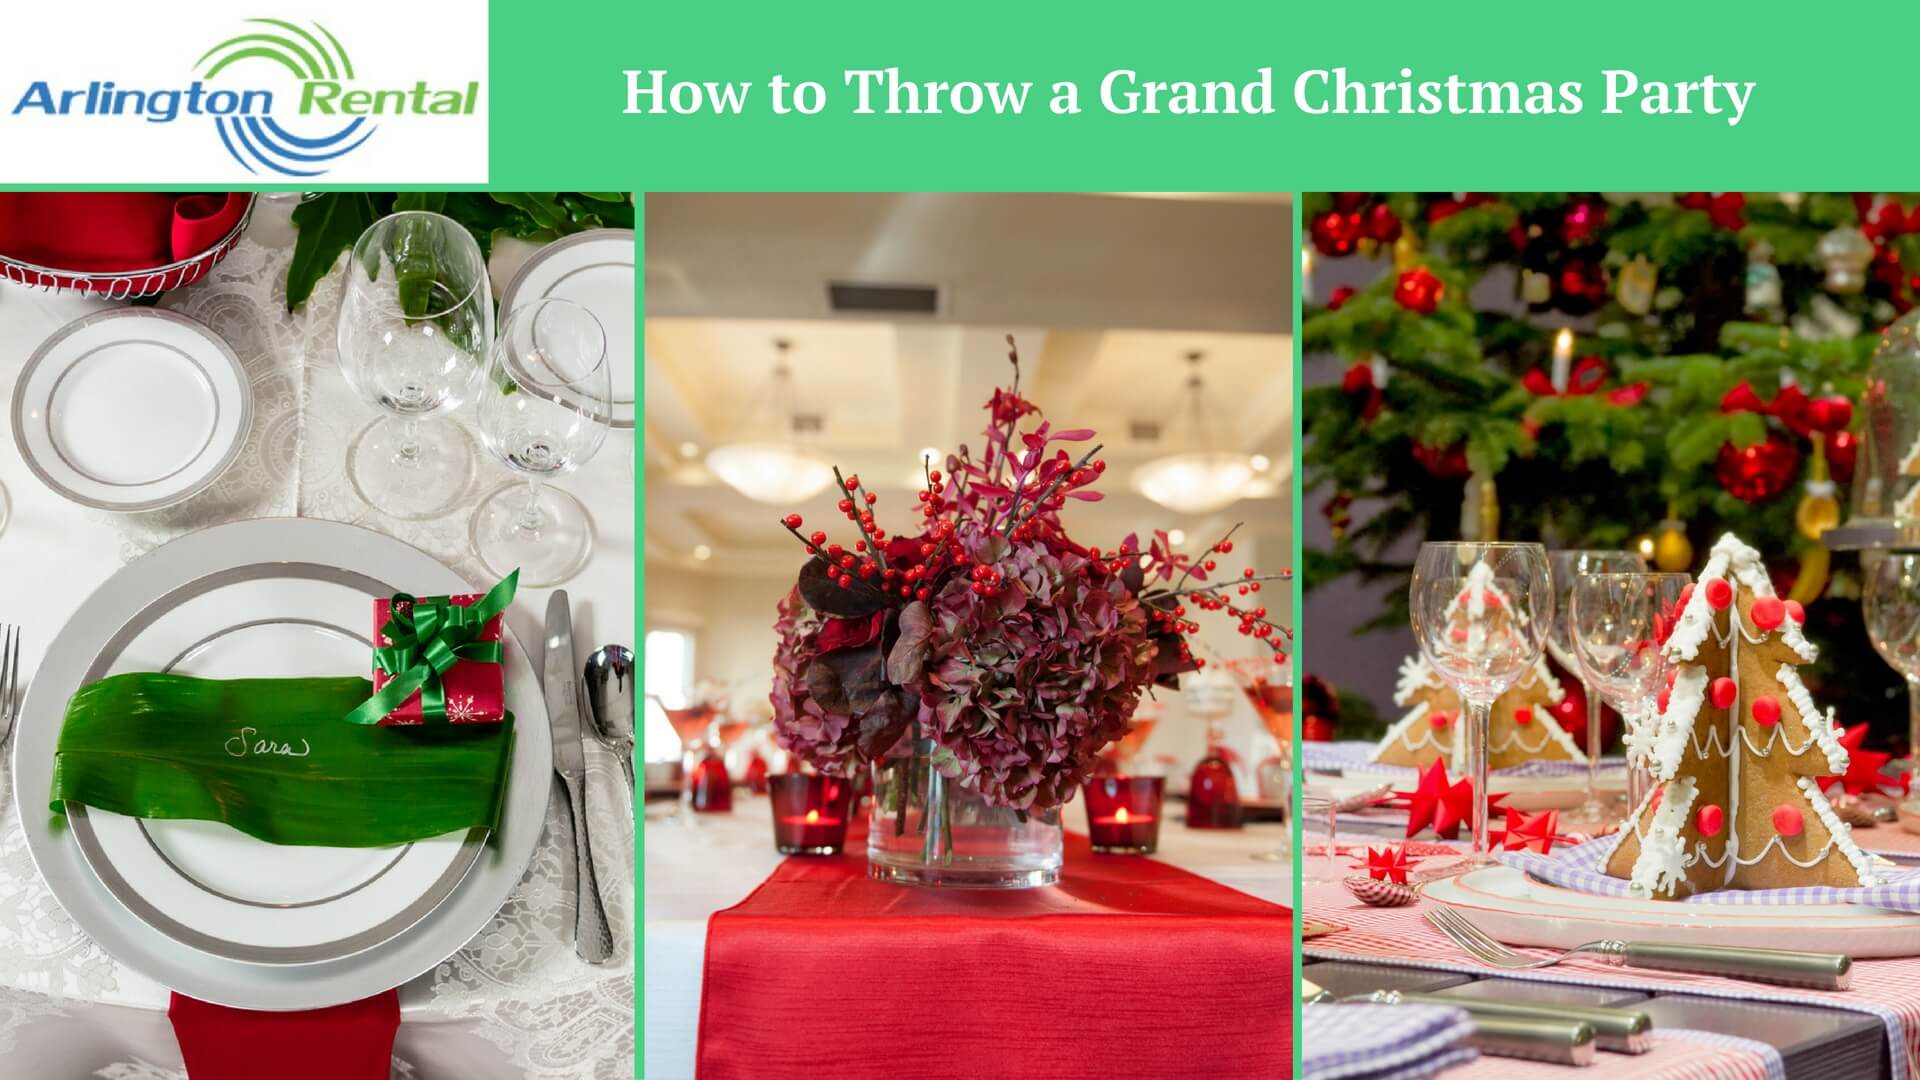 How to Throw a Grand Christmas Party